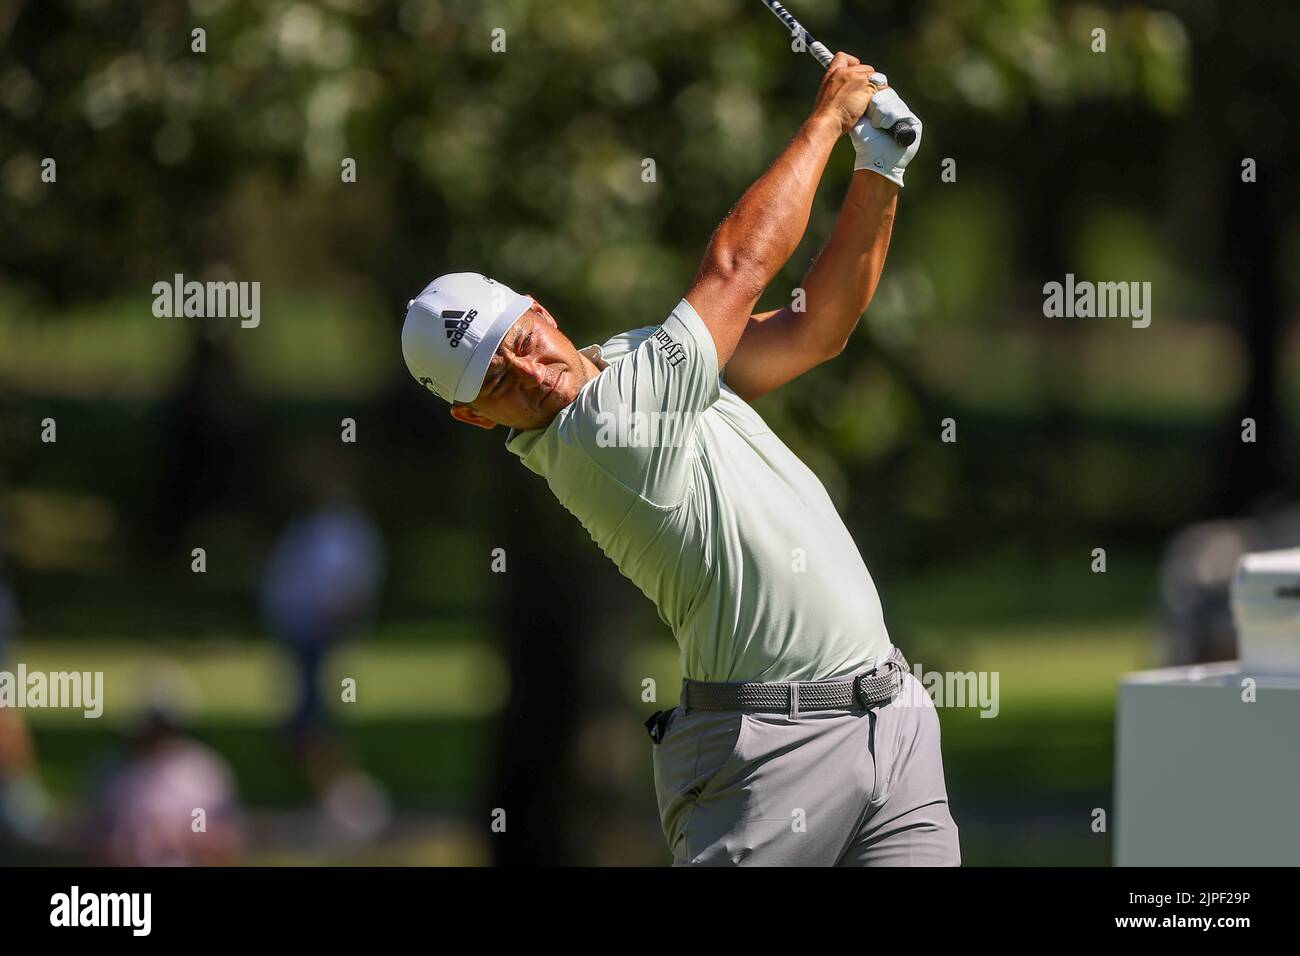 August 13, 2022: Xander Schauffele tees off during the third round of the FedEx St. Jude Championship golf tournament at TPC Southwind in Memphis, TN. Gray Siegel/Cal Sport Media Stock Photo